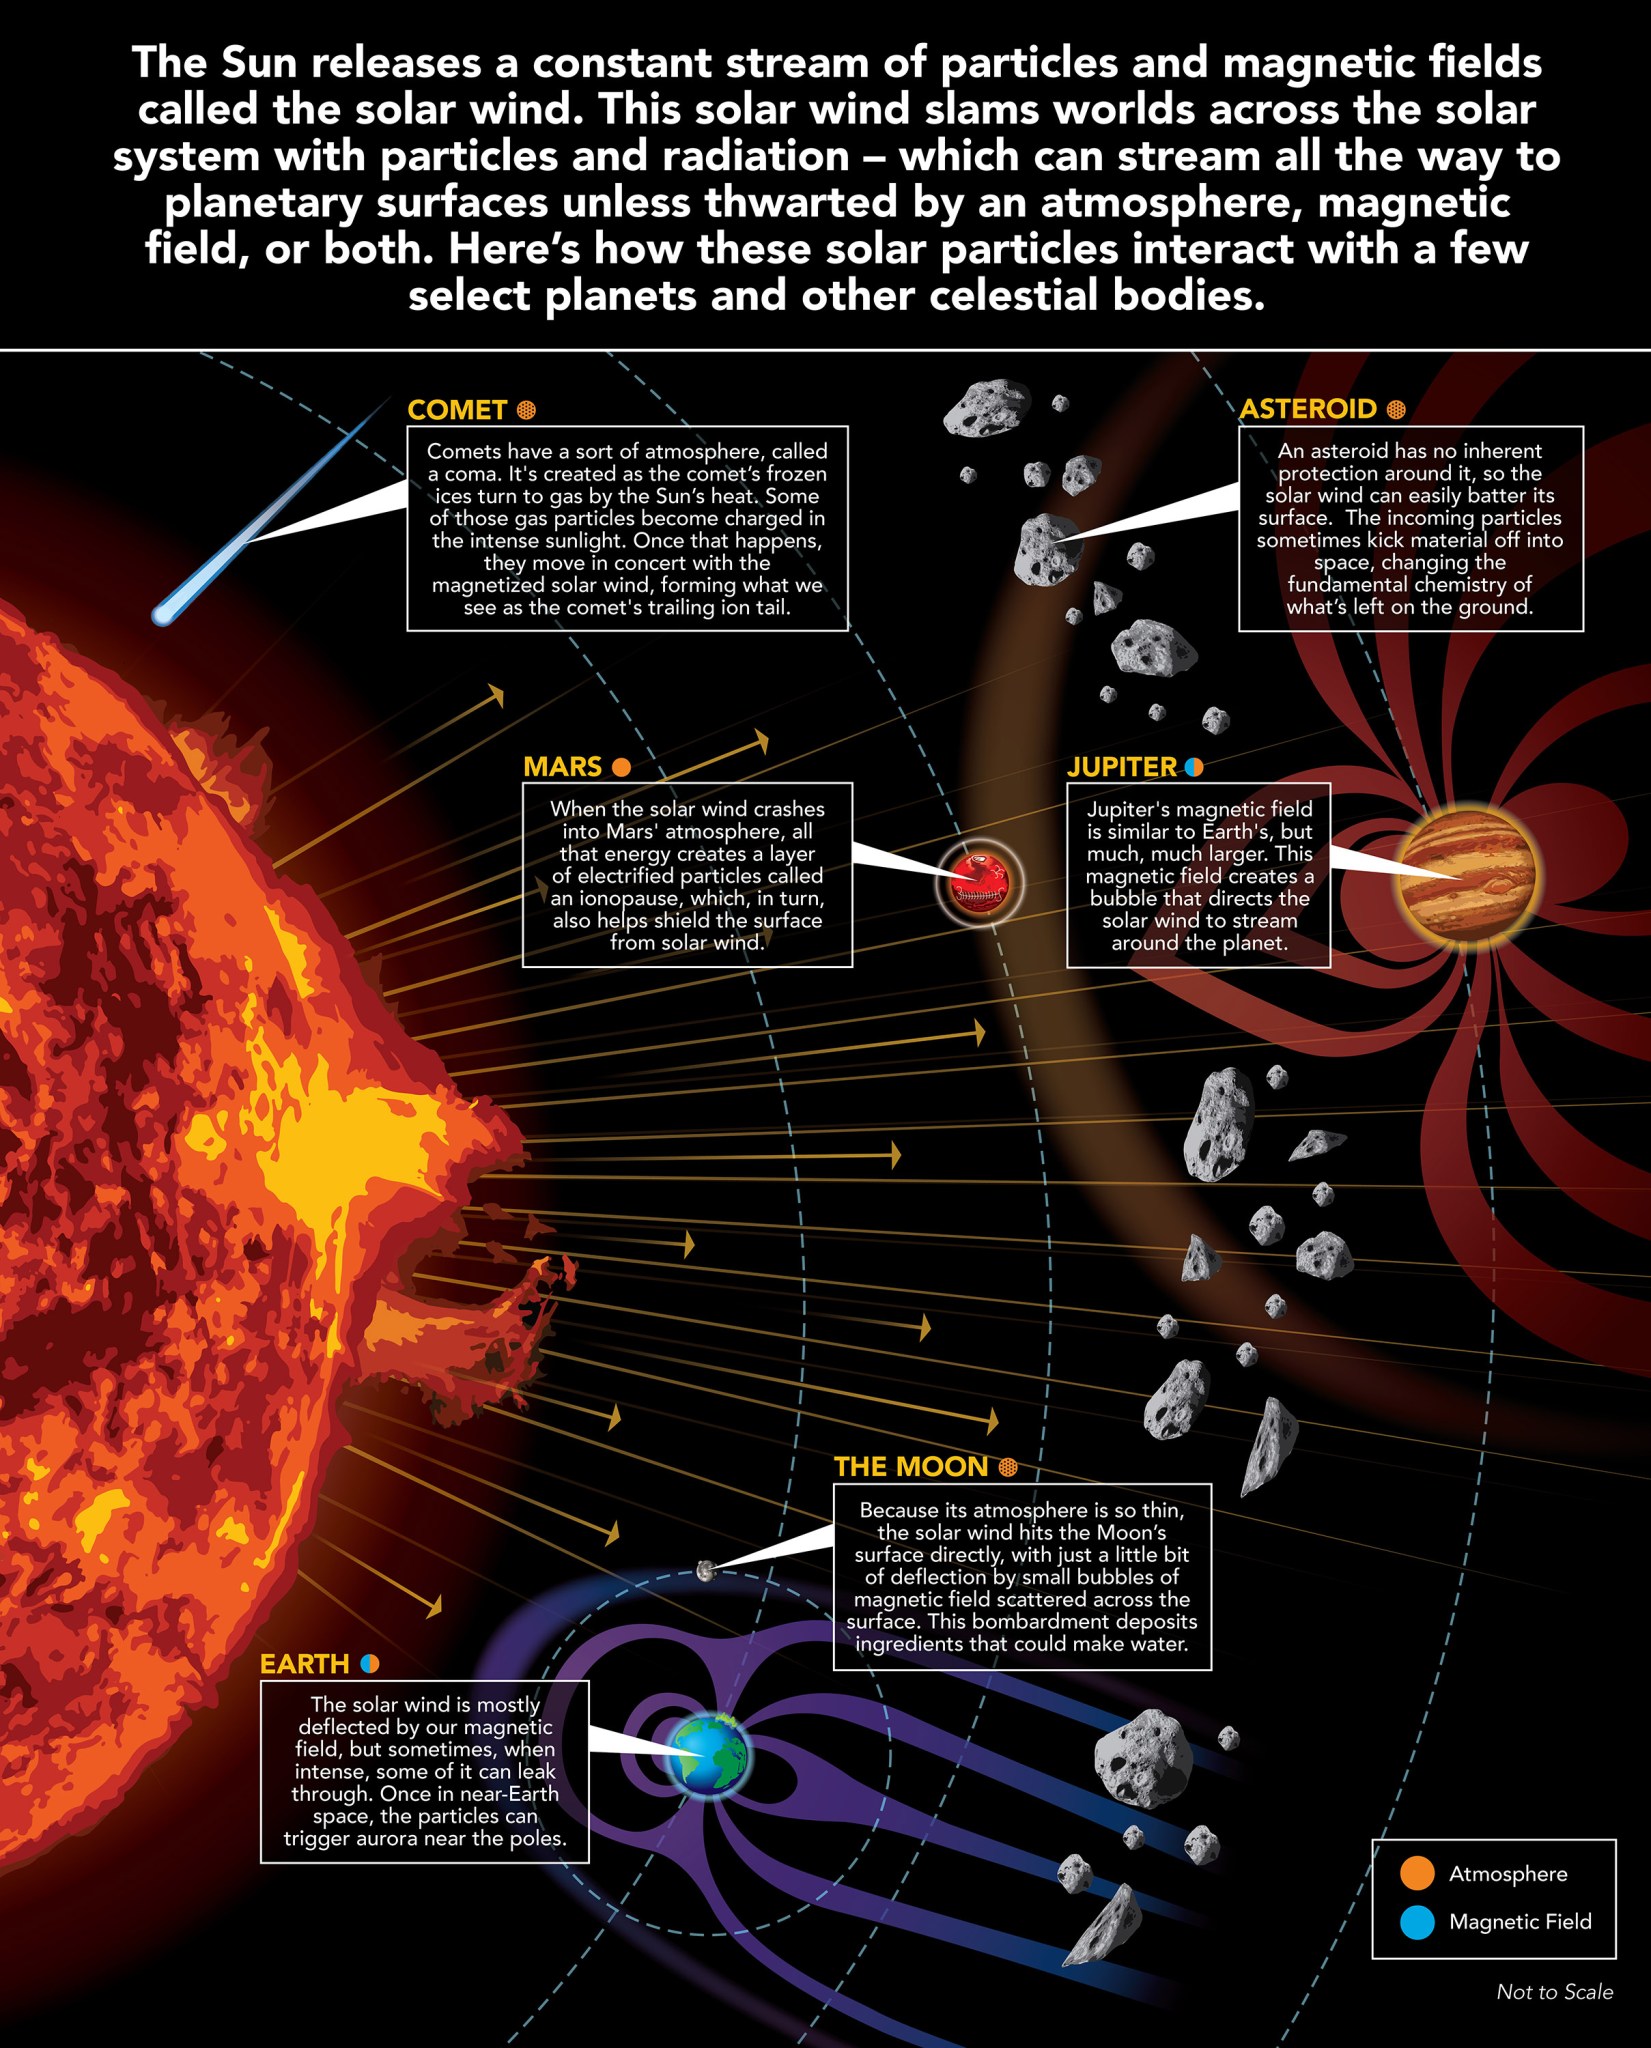 Graphic about solar wind